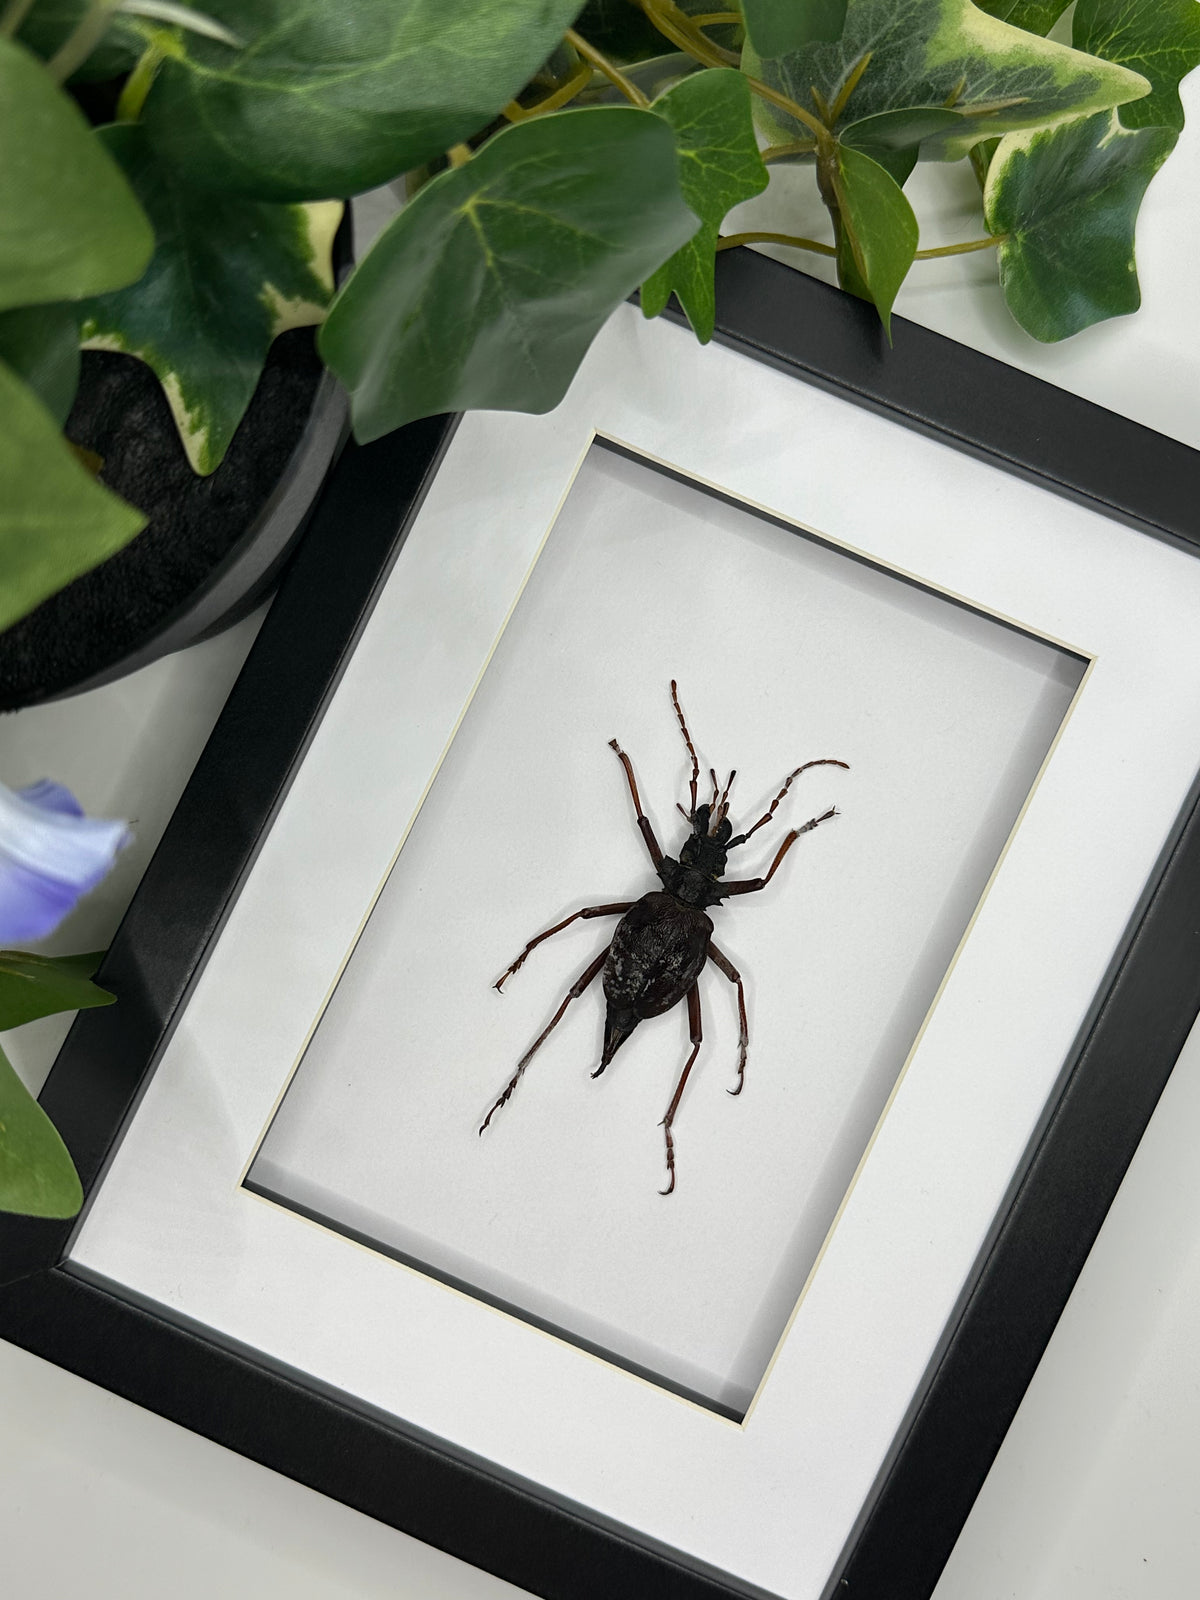 Longhorn Beetle / Prionocalus Cacicus in a frame